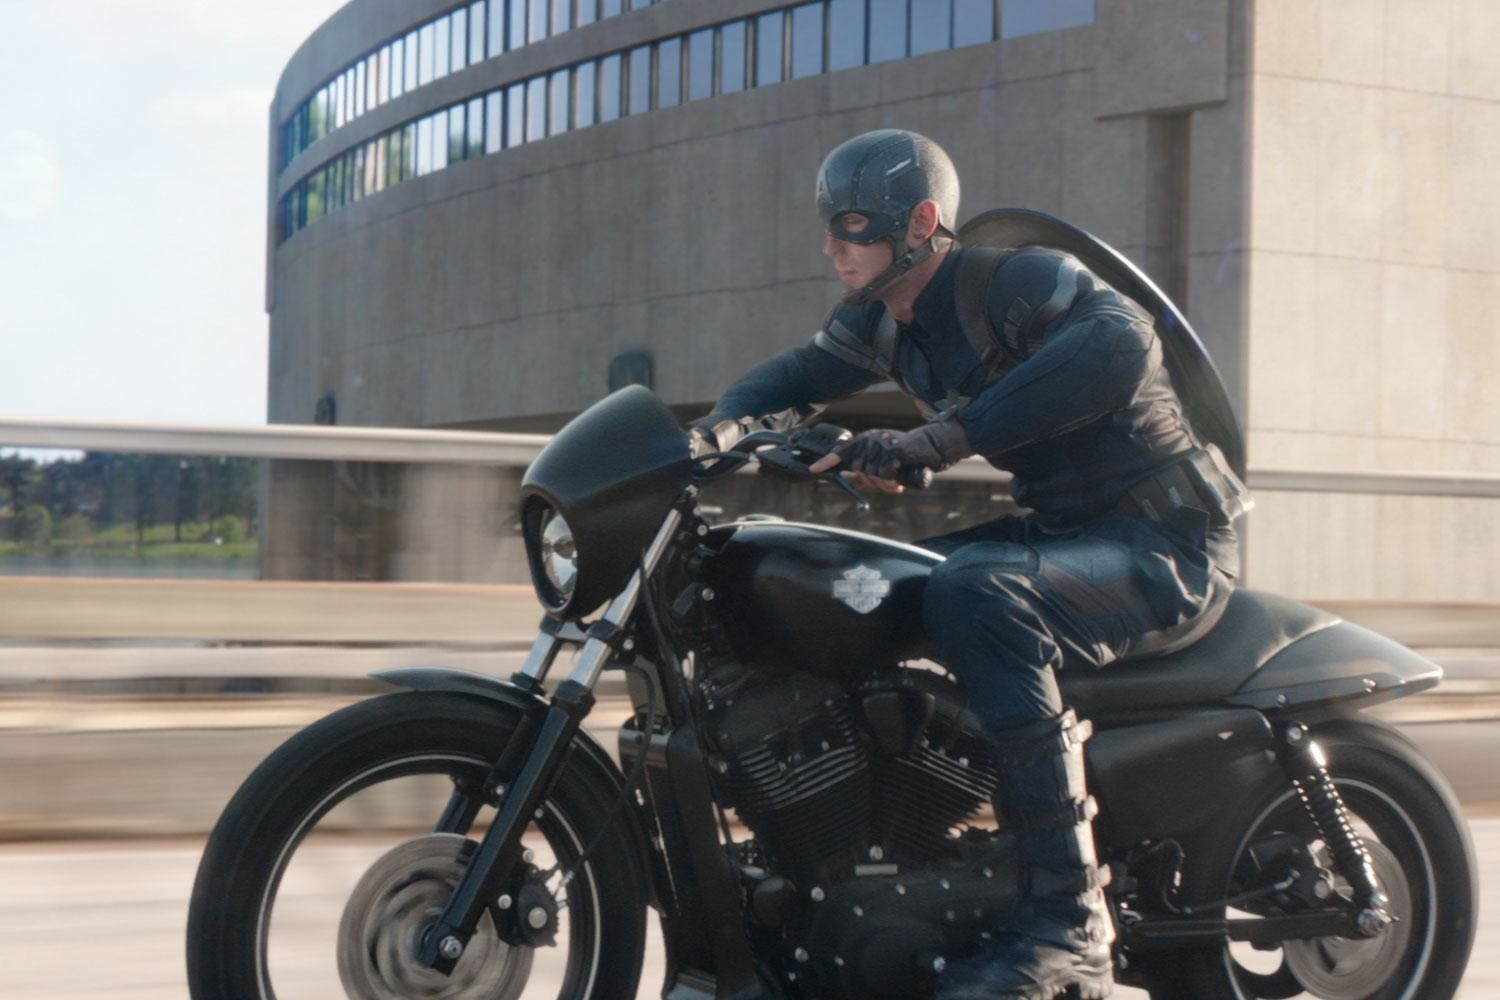 Which Marvel Hero/Villain Hybrid Character Are You? captain america motorcycle